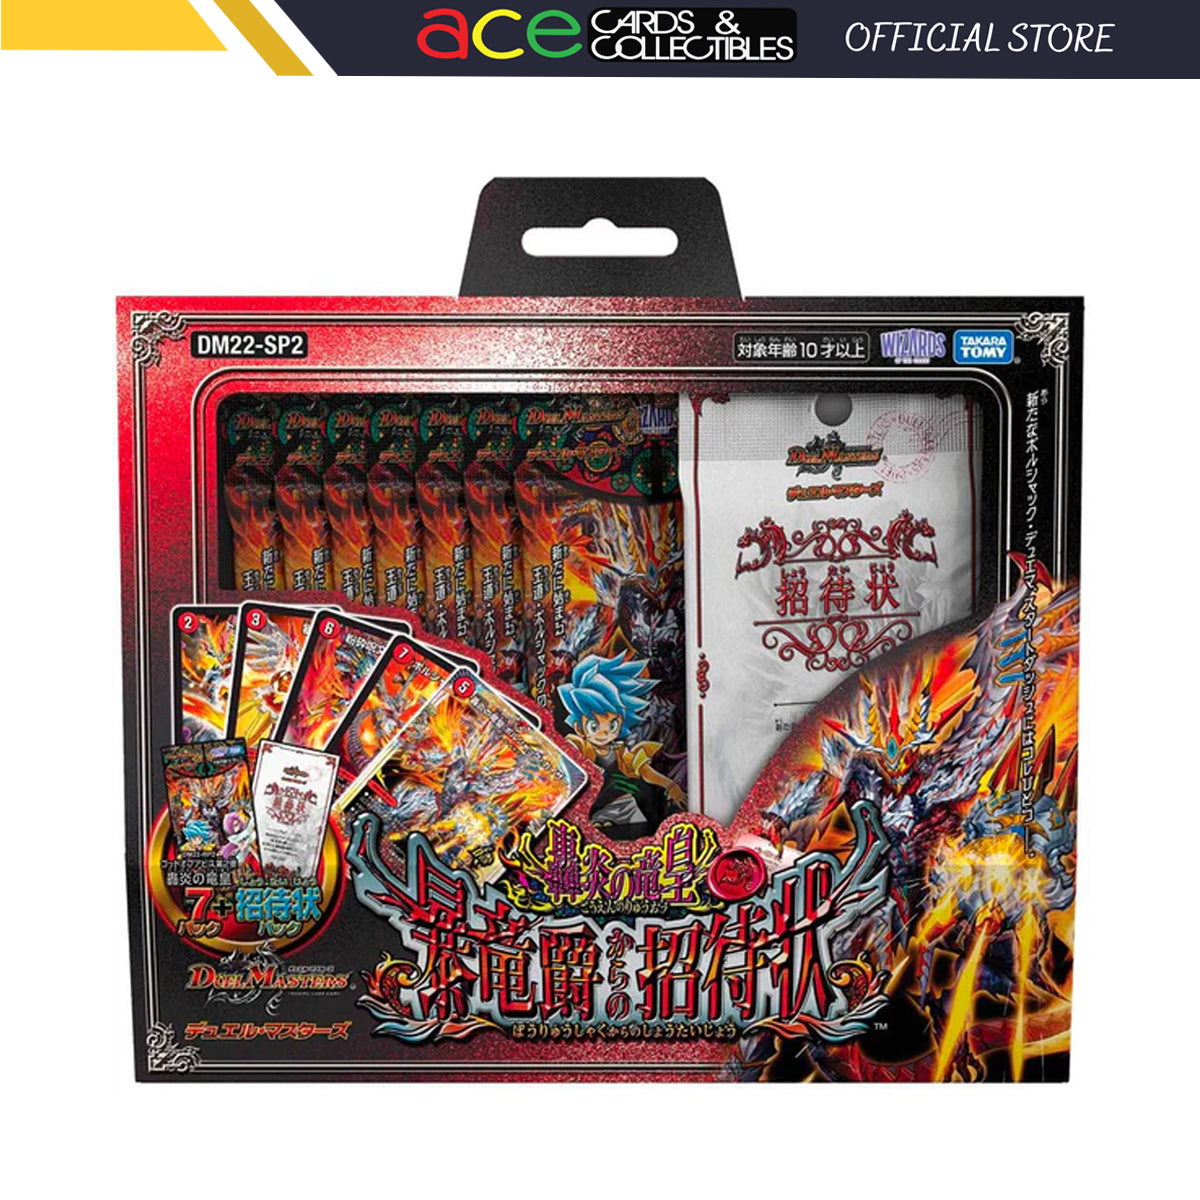 Duel Masters TCG "Dragon Emperor of Roaring Flame" Invitation from the Raging Dragon Count [DM22-SP2] (Japanese)-Takara Tomy-Ace Cards & Collectibles